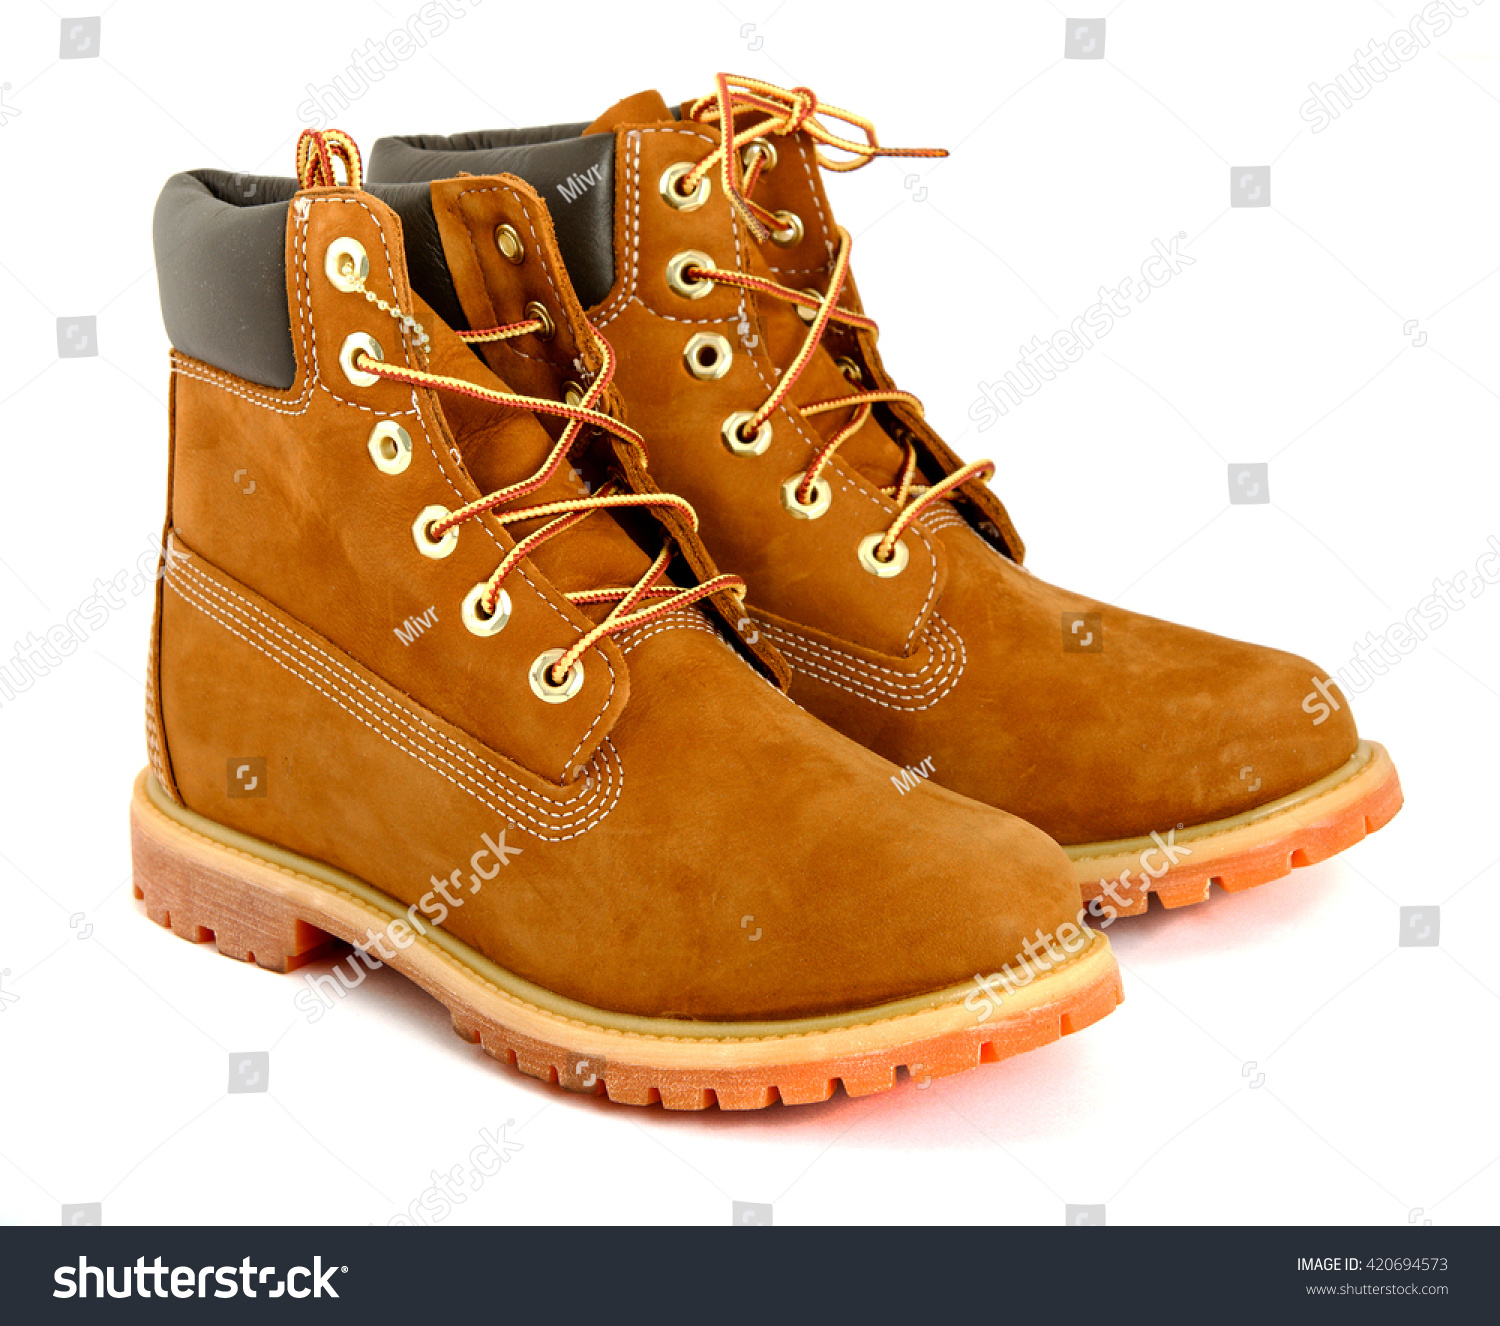 Brown lady's boots with shoelace on white background. #420694573